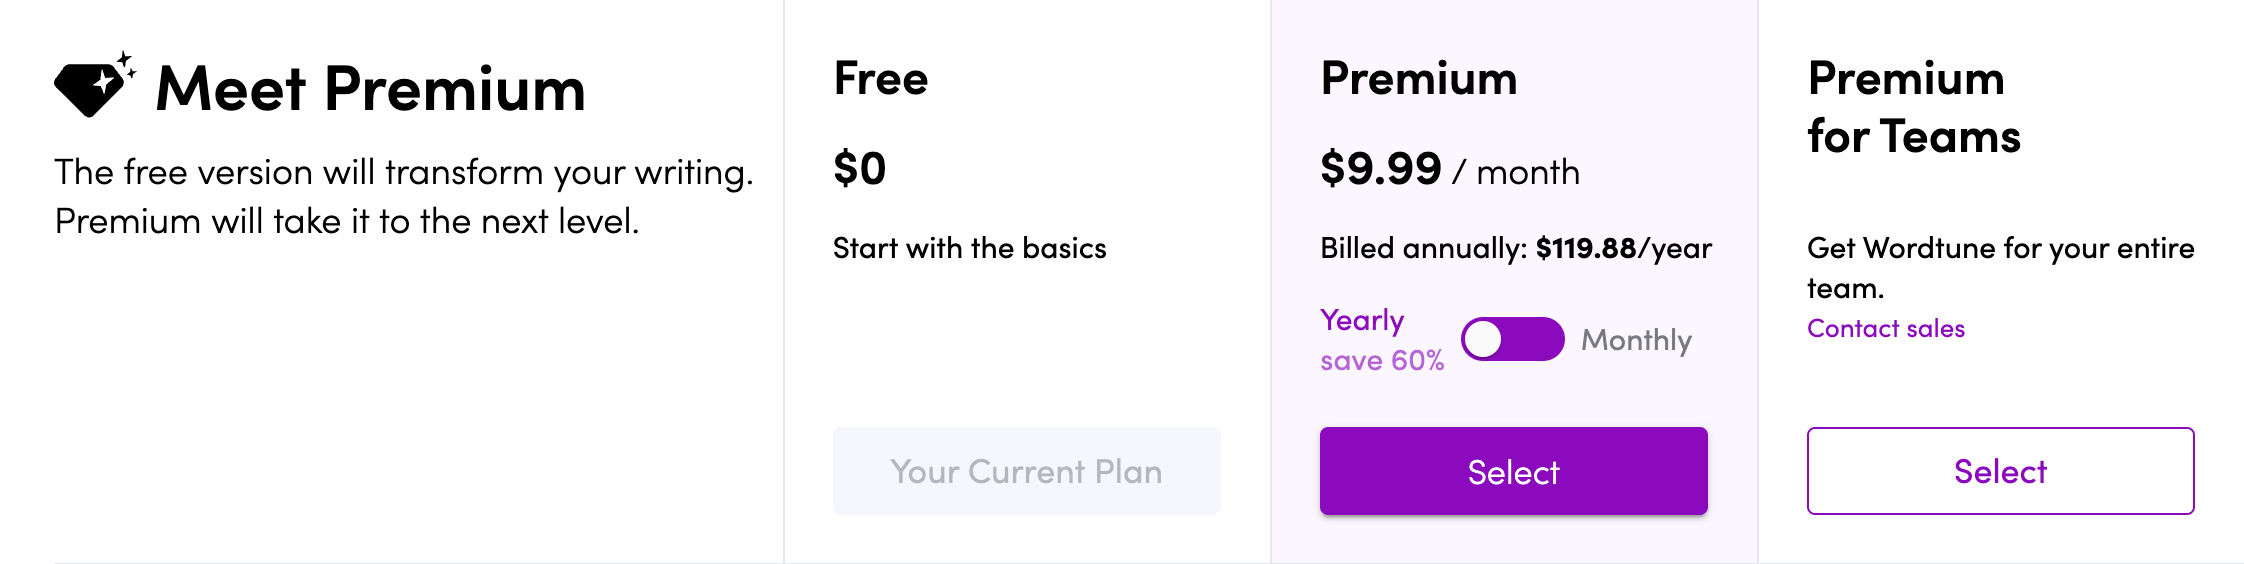 Pricing info from Wordtune's website